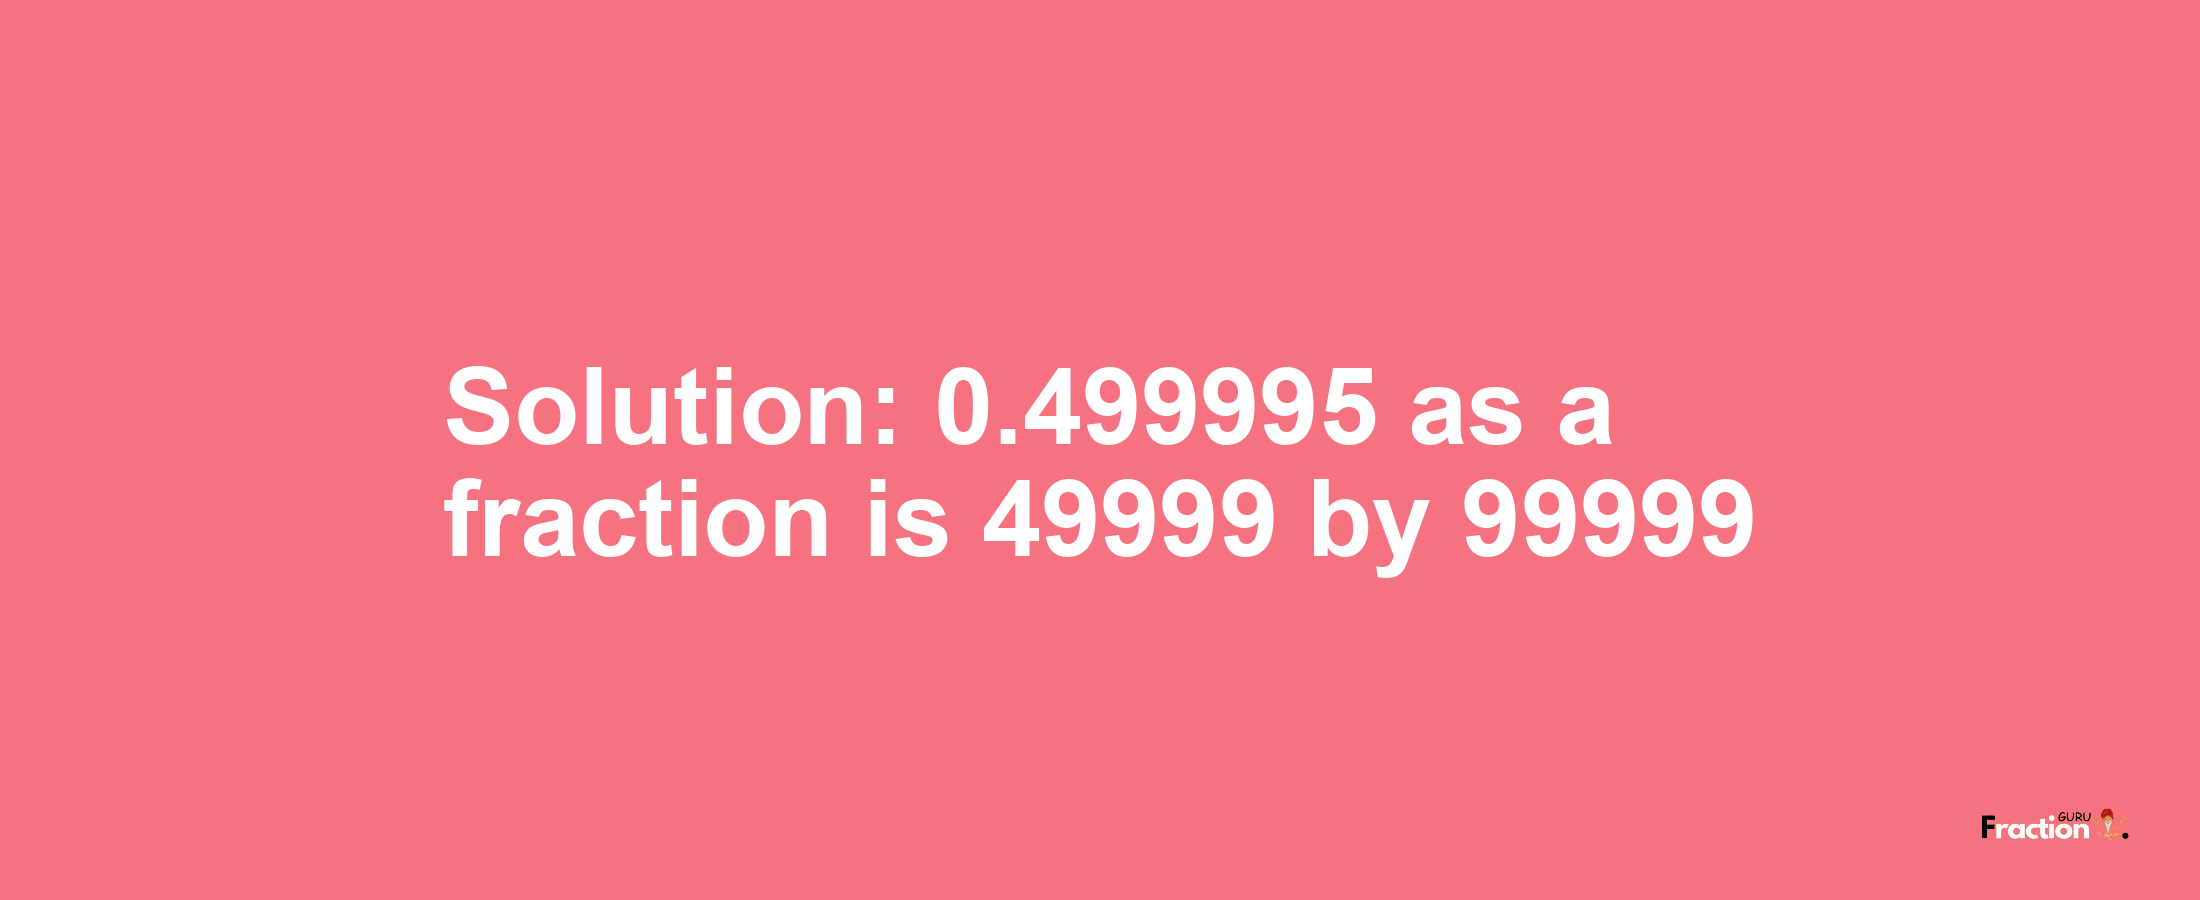 Solution:0.499995 as a fraction is 49999/99999